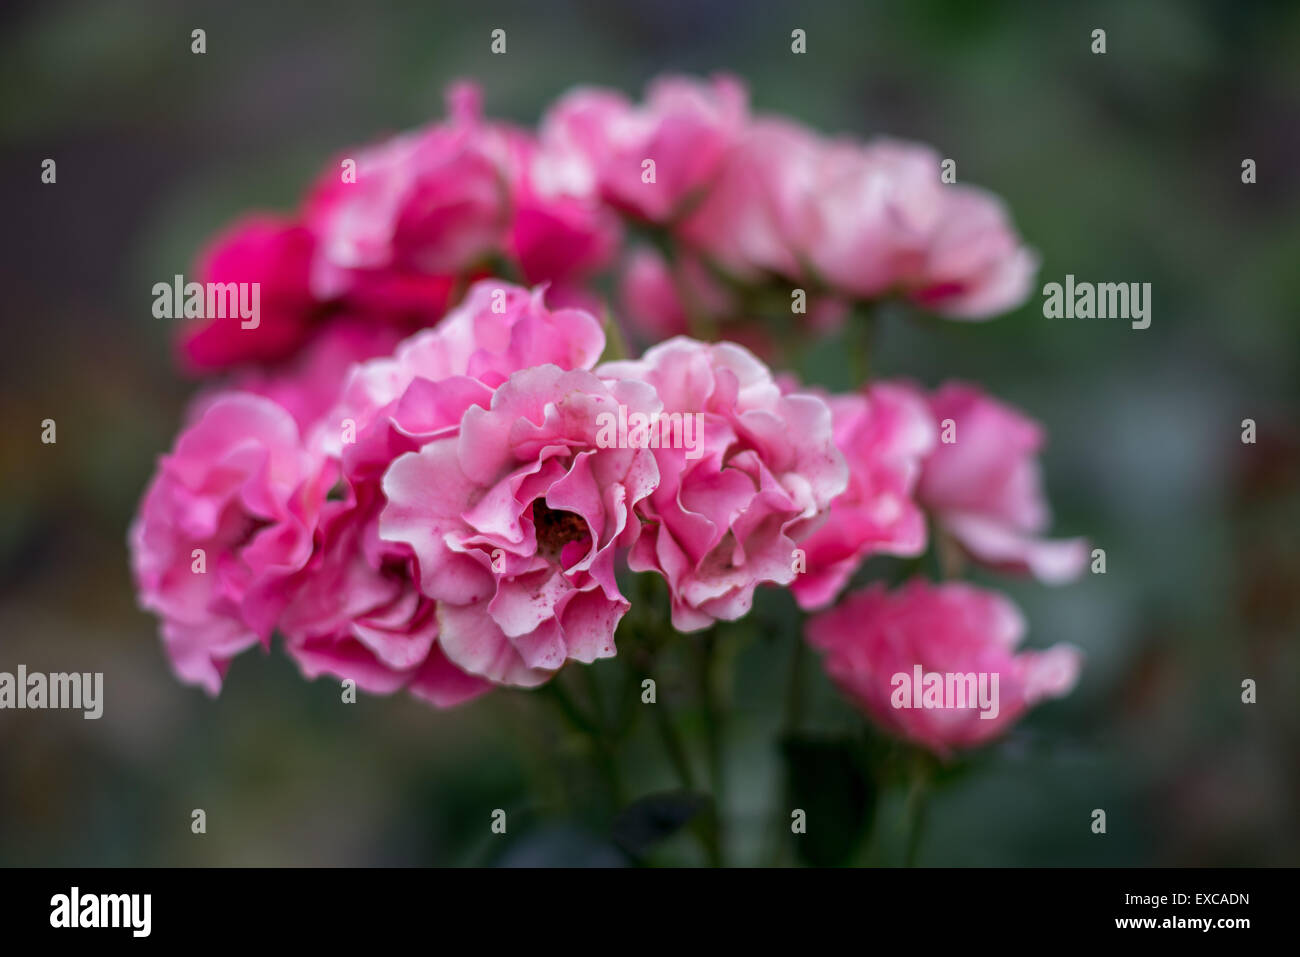 Dreamy pink roses in bunch Stock Photo